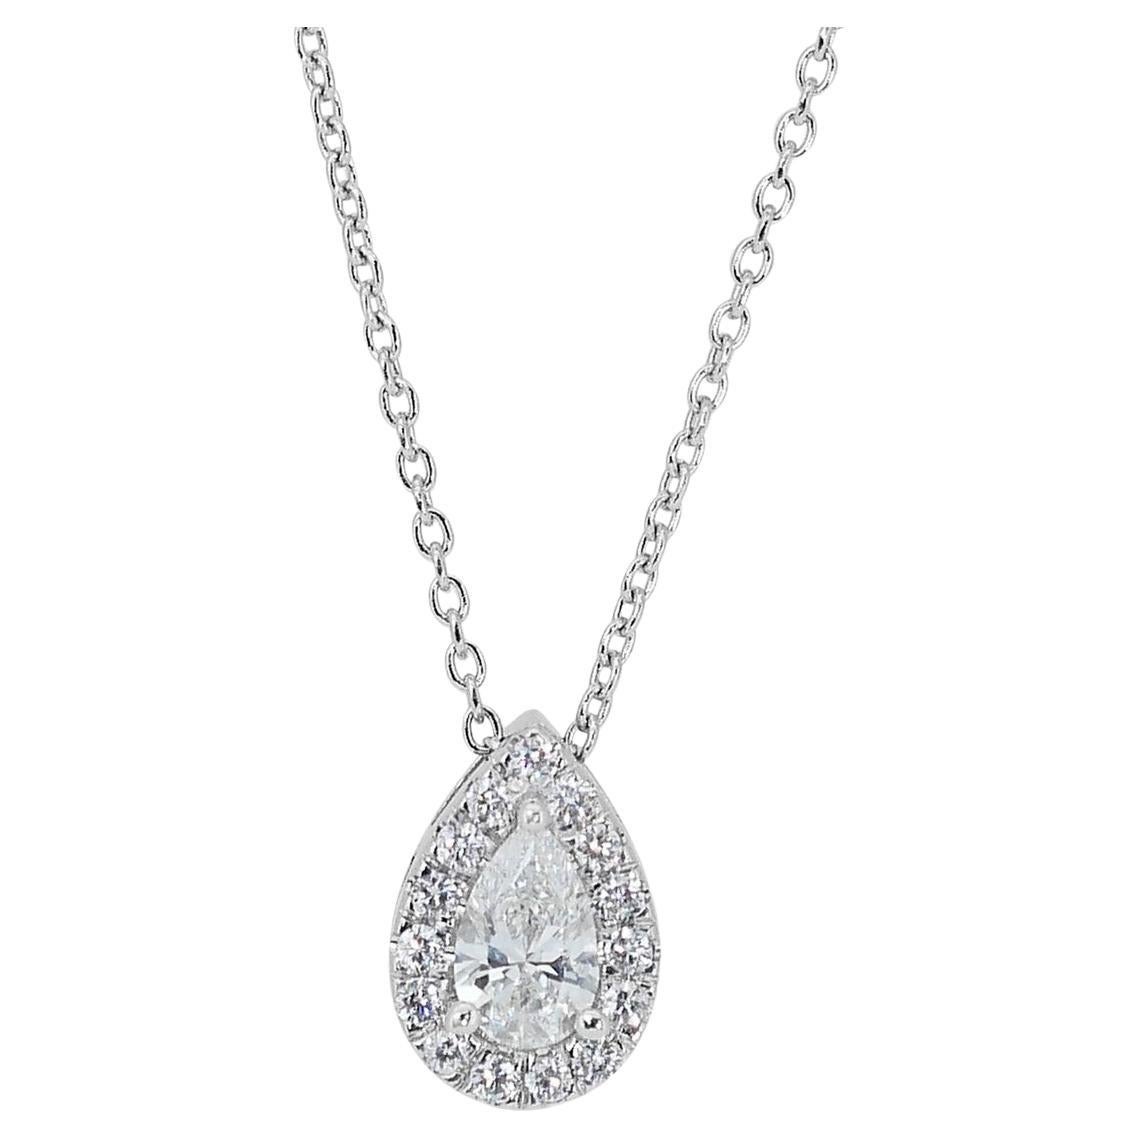 Beautiful 0.71 ct Pear Diamond Halo Necklace in 18k White Gold – GIA Certified For Sale